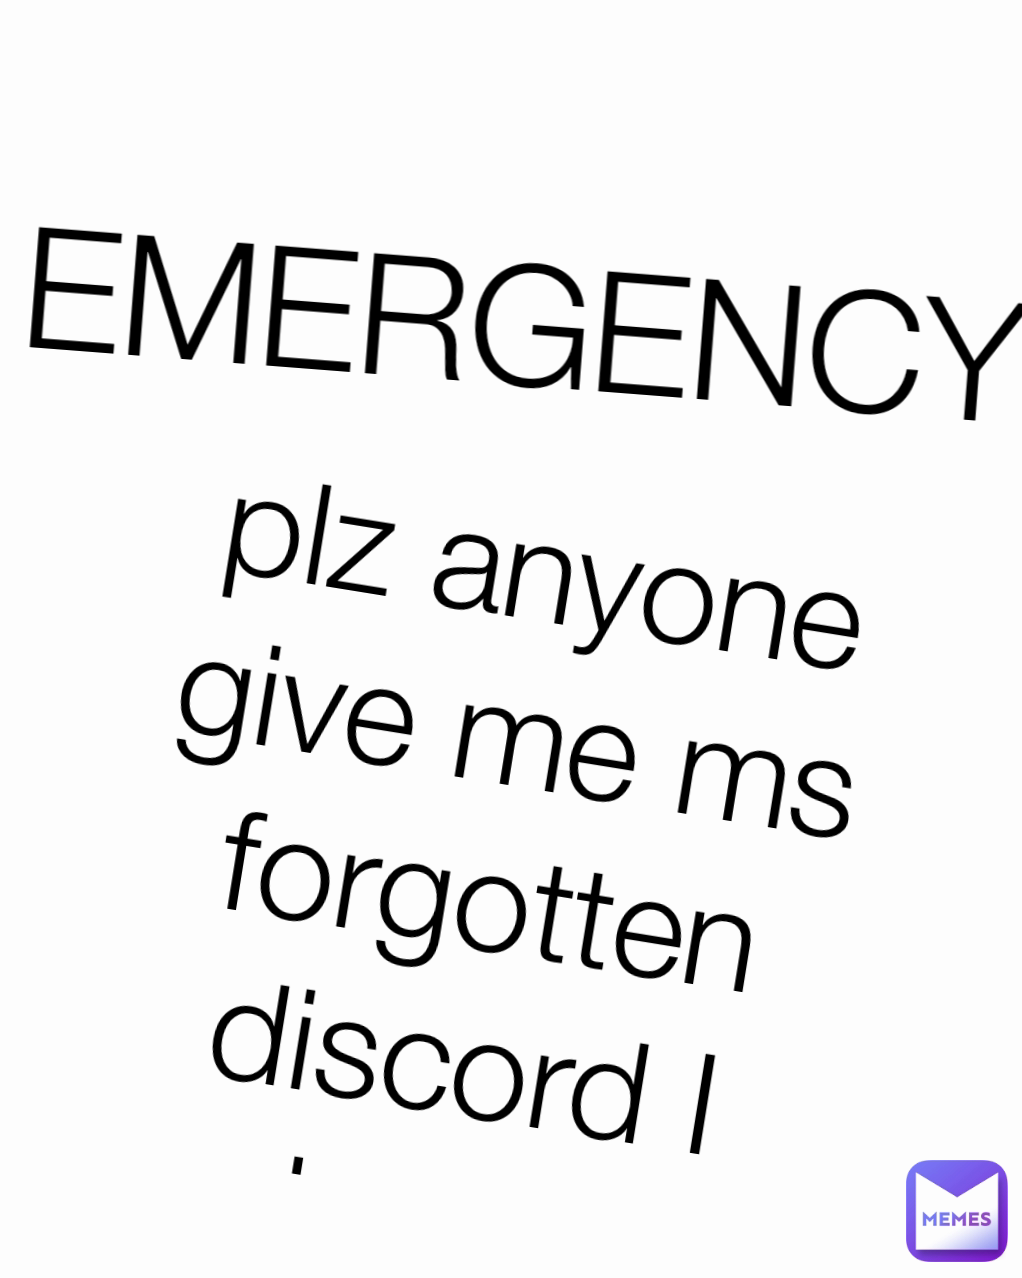 can anyone plz give me @ms._.forgotten's discord plz, I have lost touch with her  EMERGENCY
 plz anyone give me ms forgotten discord I have 
lost touch with her